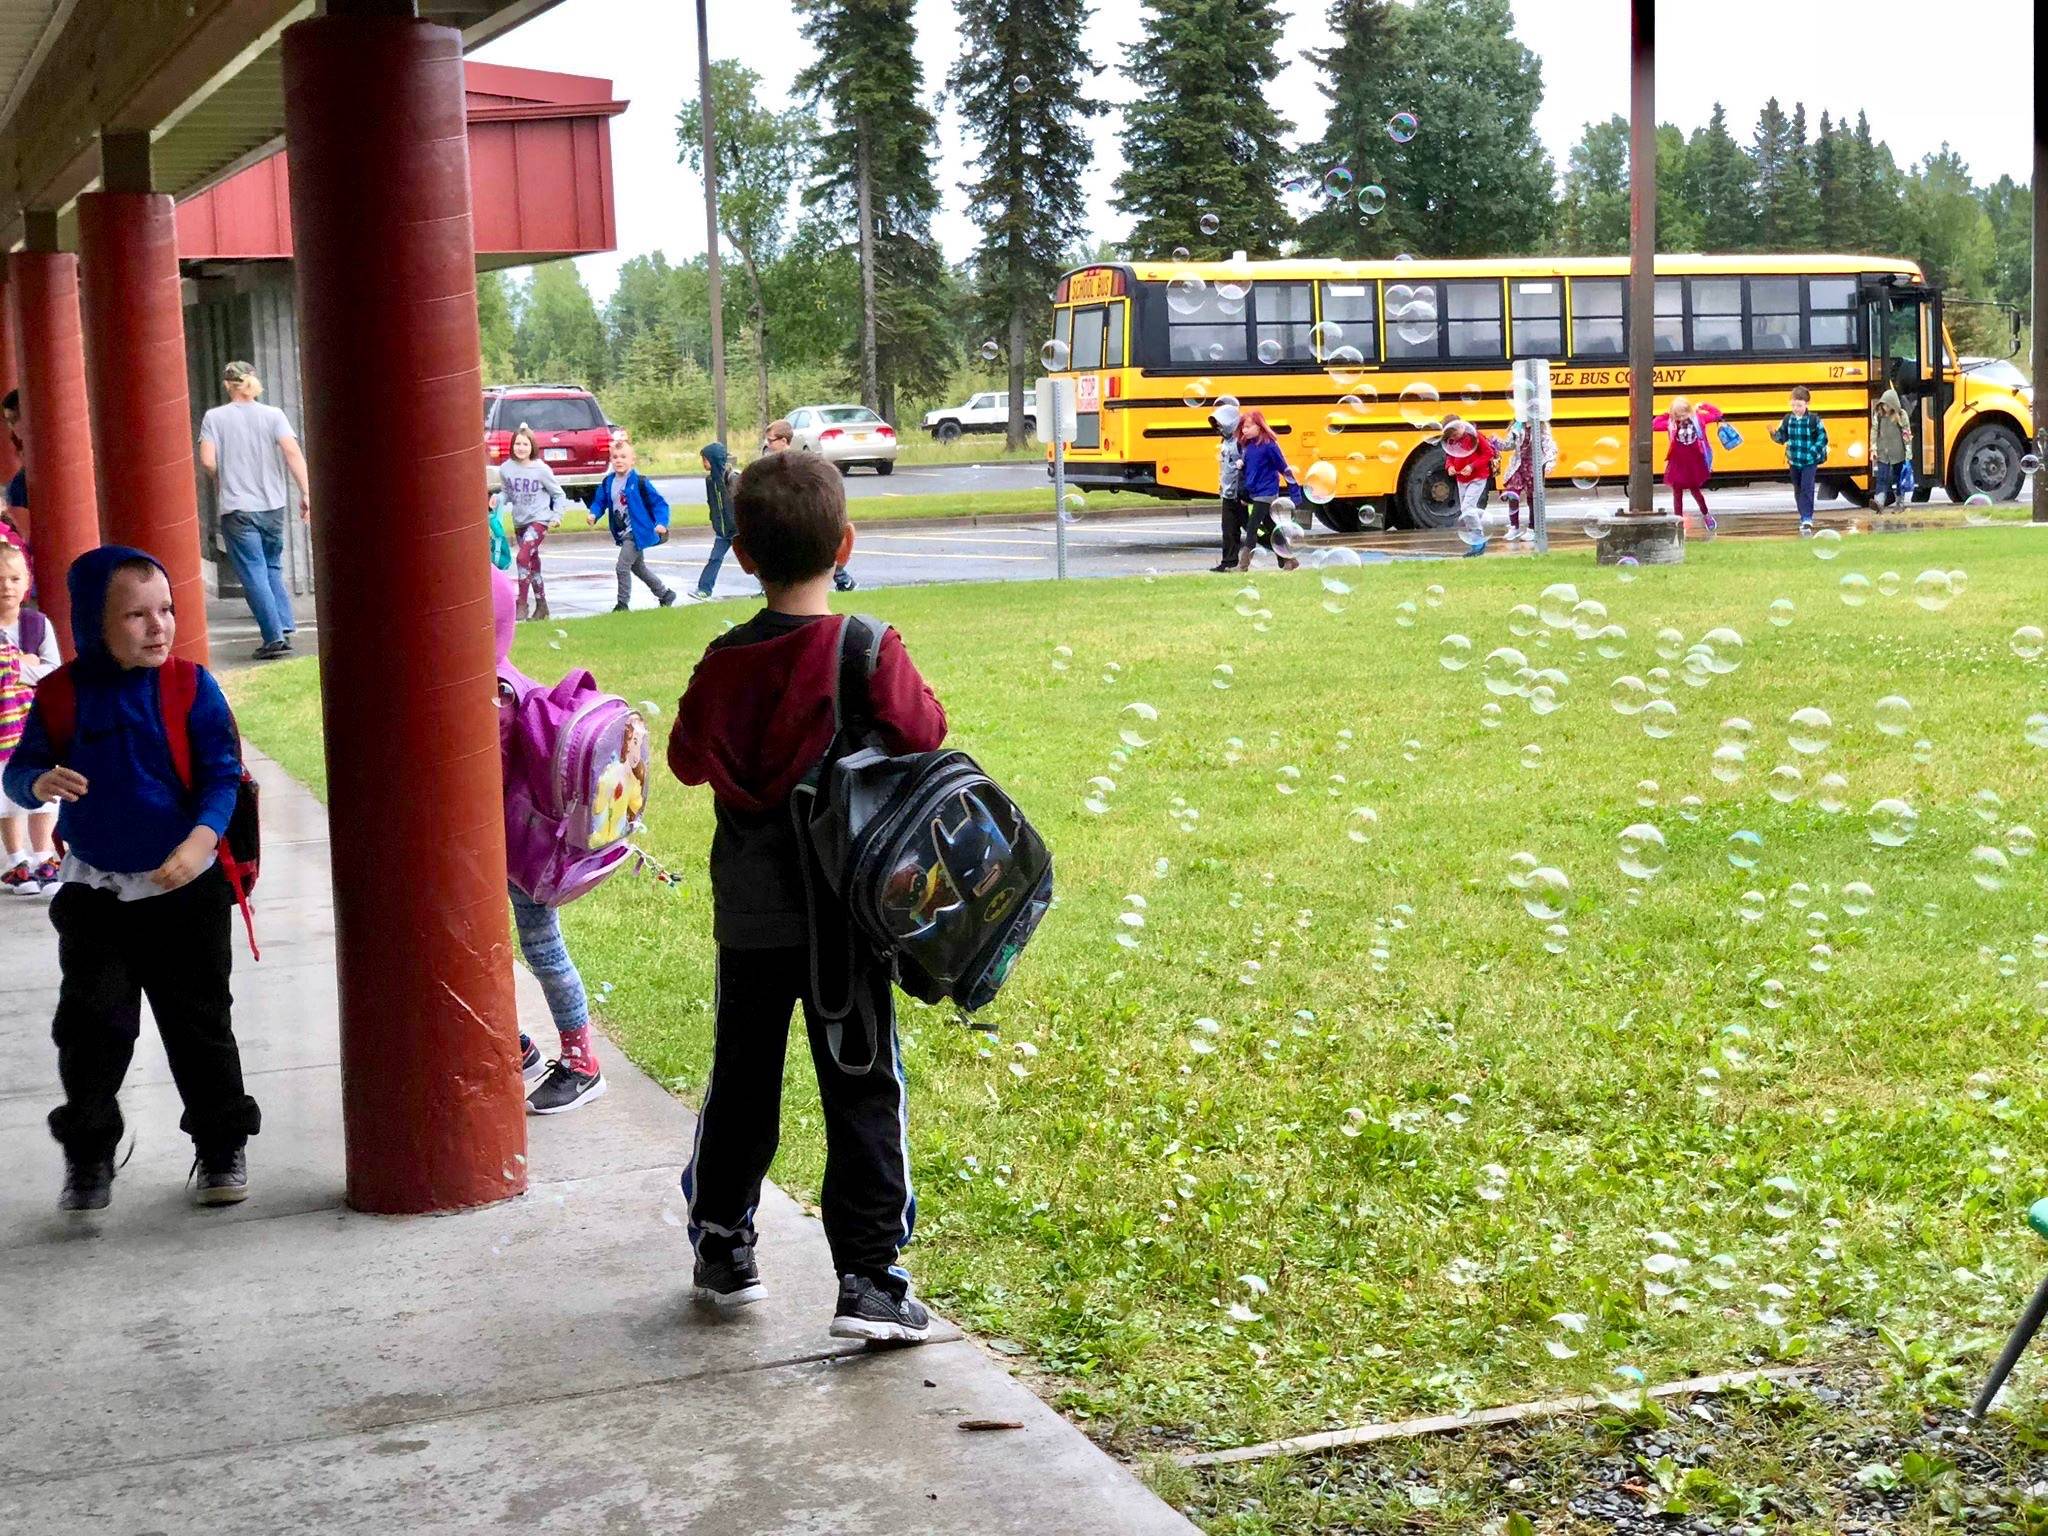 Students were welcomed to their first day of school with bubbles and jazz music on Tuesday, Aug. 21, 2018, at Mountain View Elementary in Kenai, Alaska. (Photo by Victoria Petersen/Peninsula Clarion)